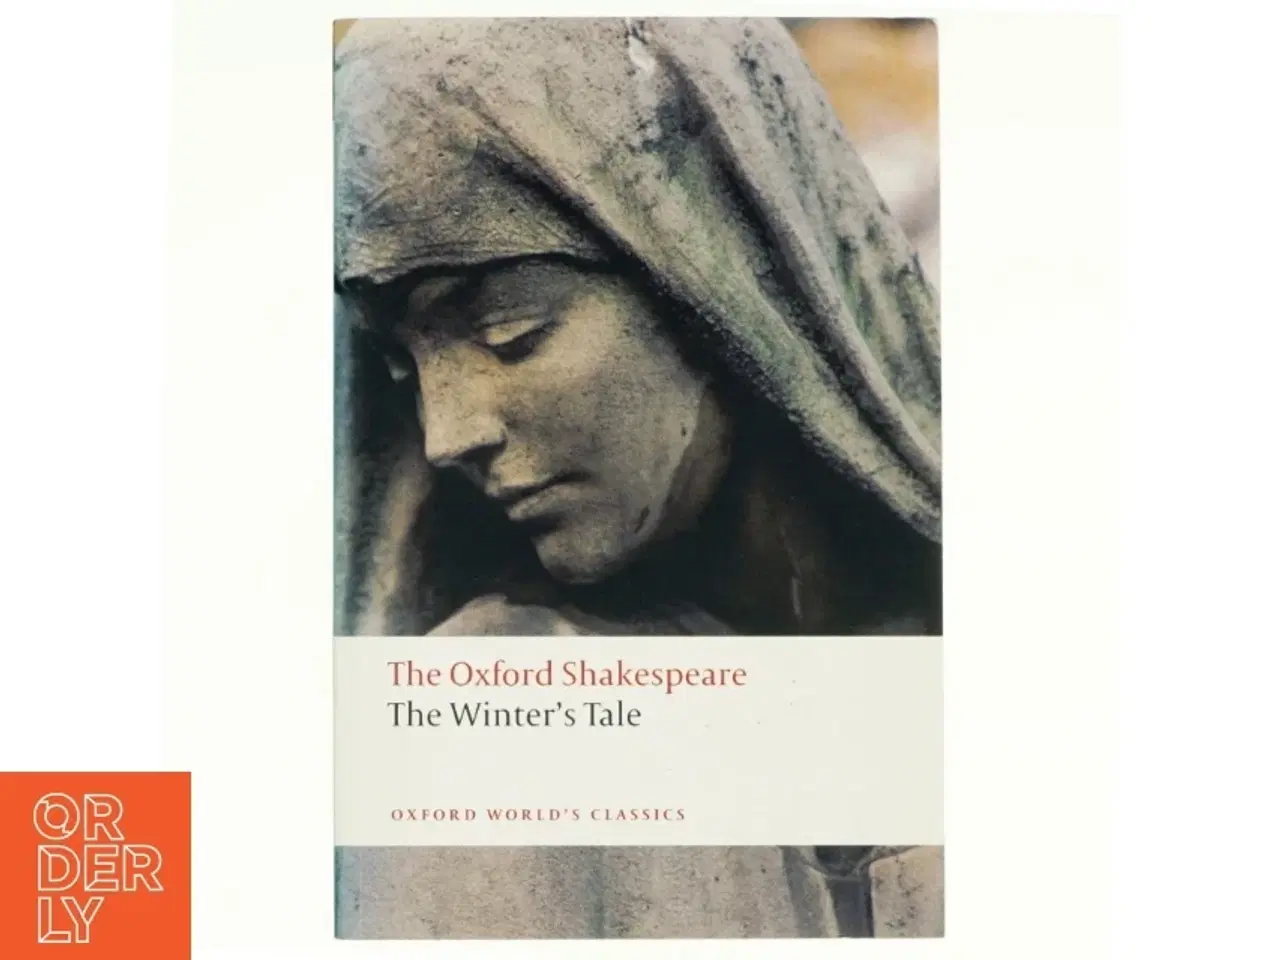 Billede 1 - The Oxford Shakespeare: The Winter's Tale af William Shakespeare (Bog)